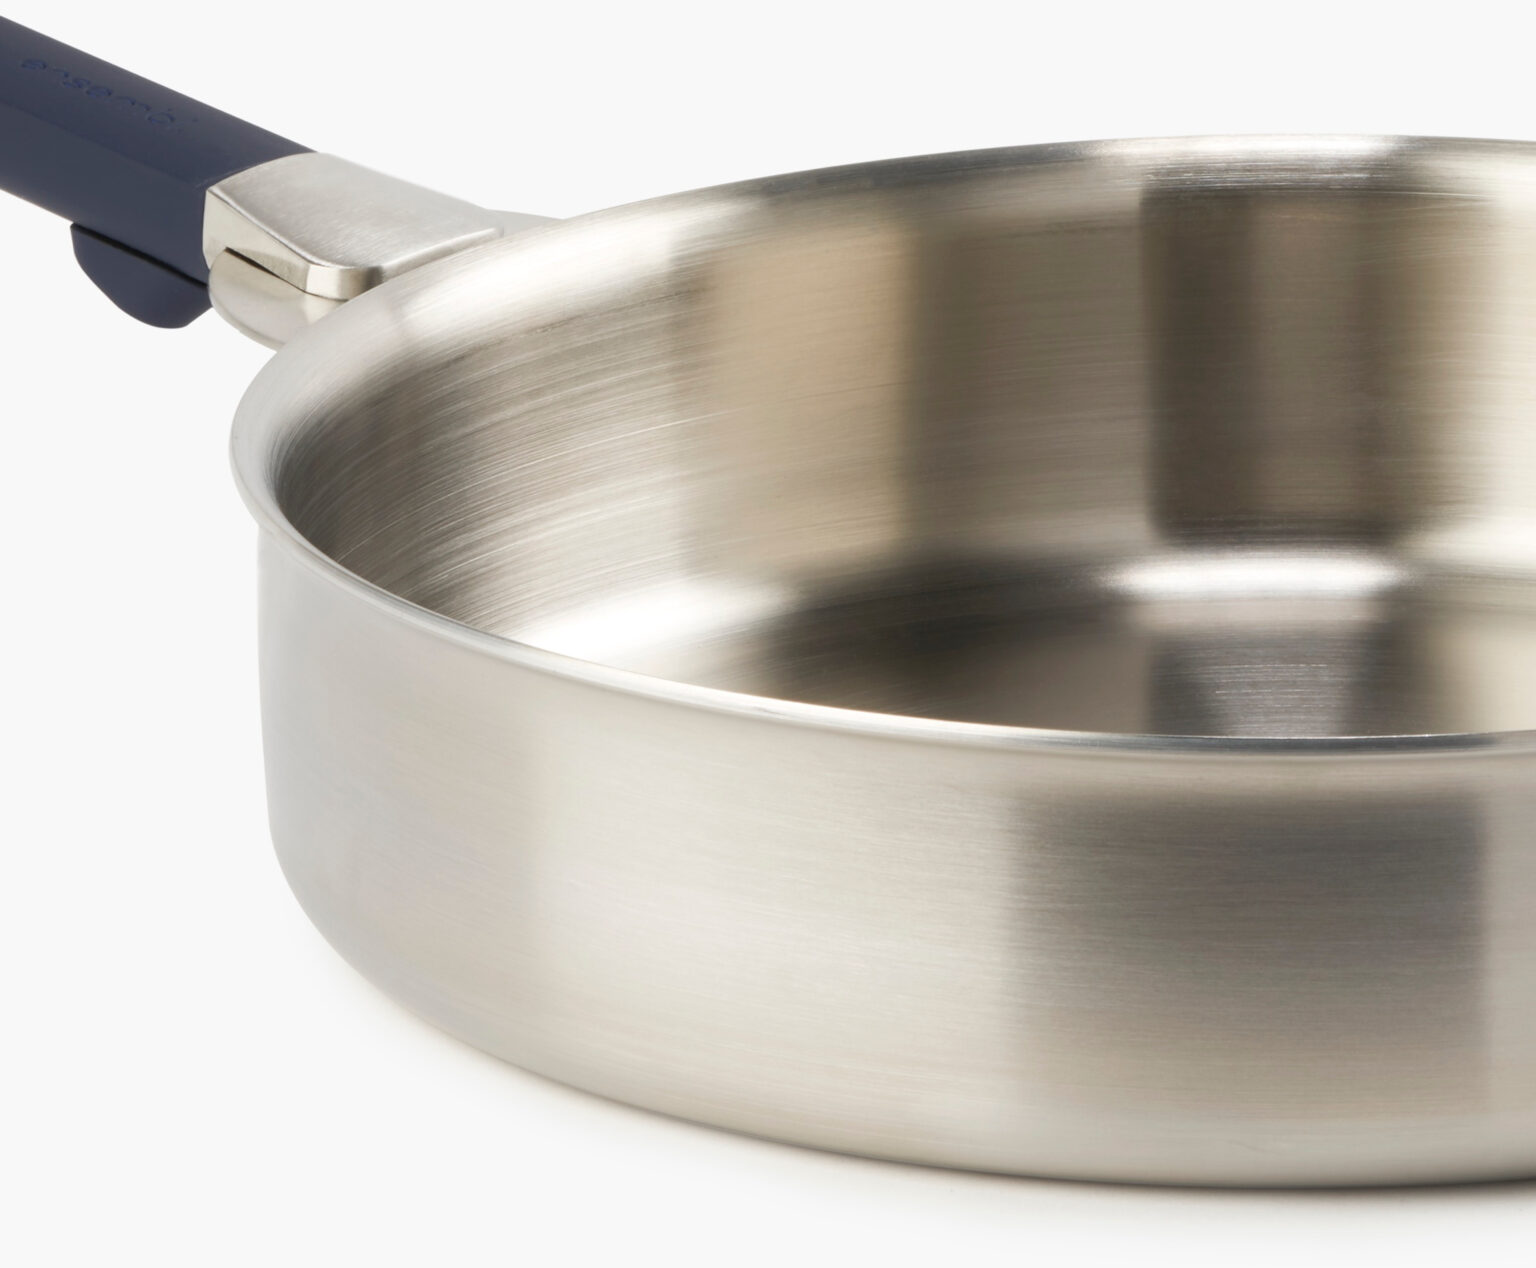 Stainless steel cookware rivet-free interior